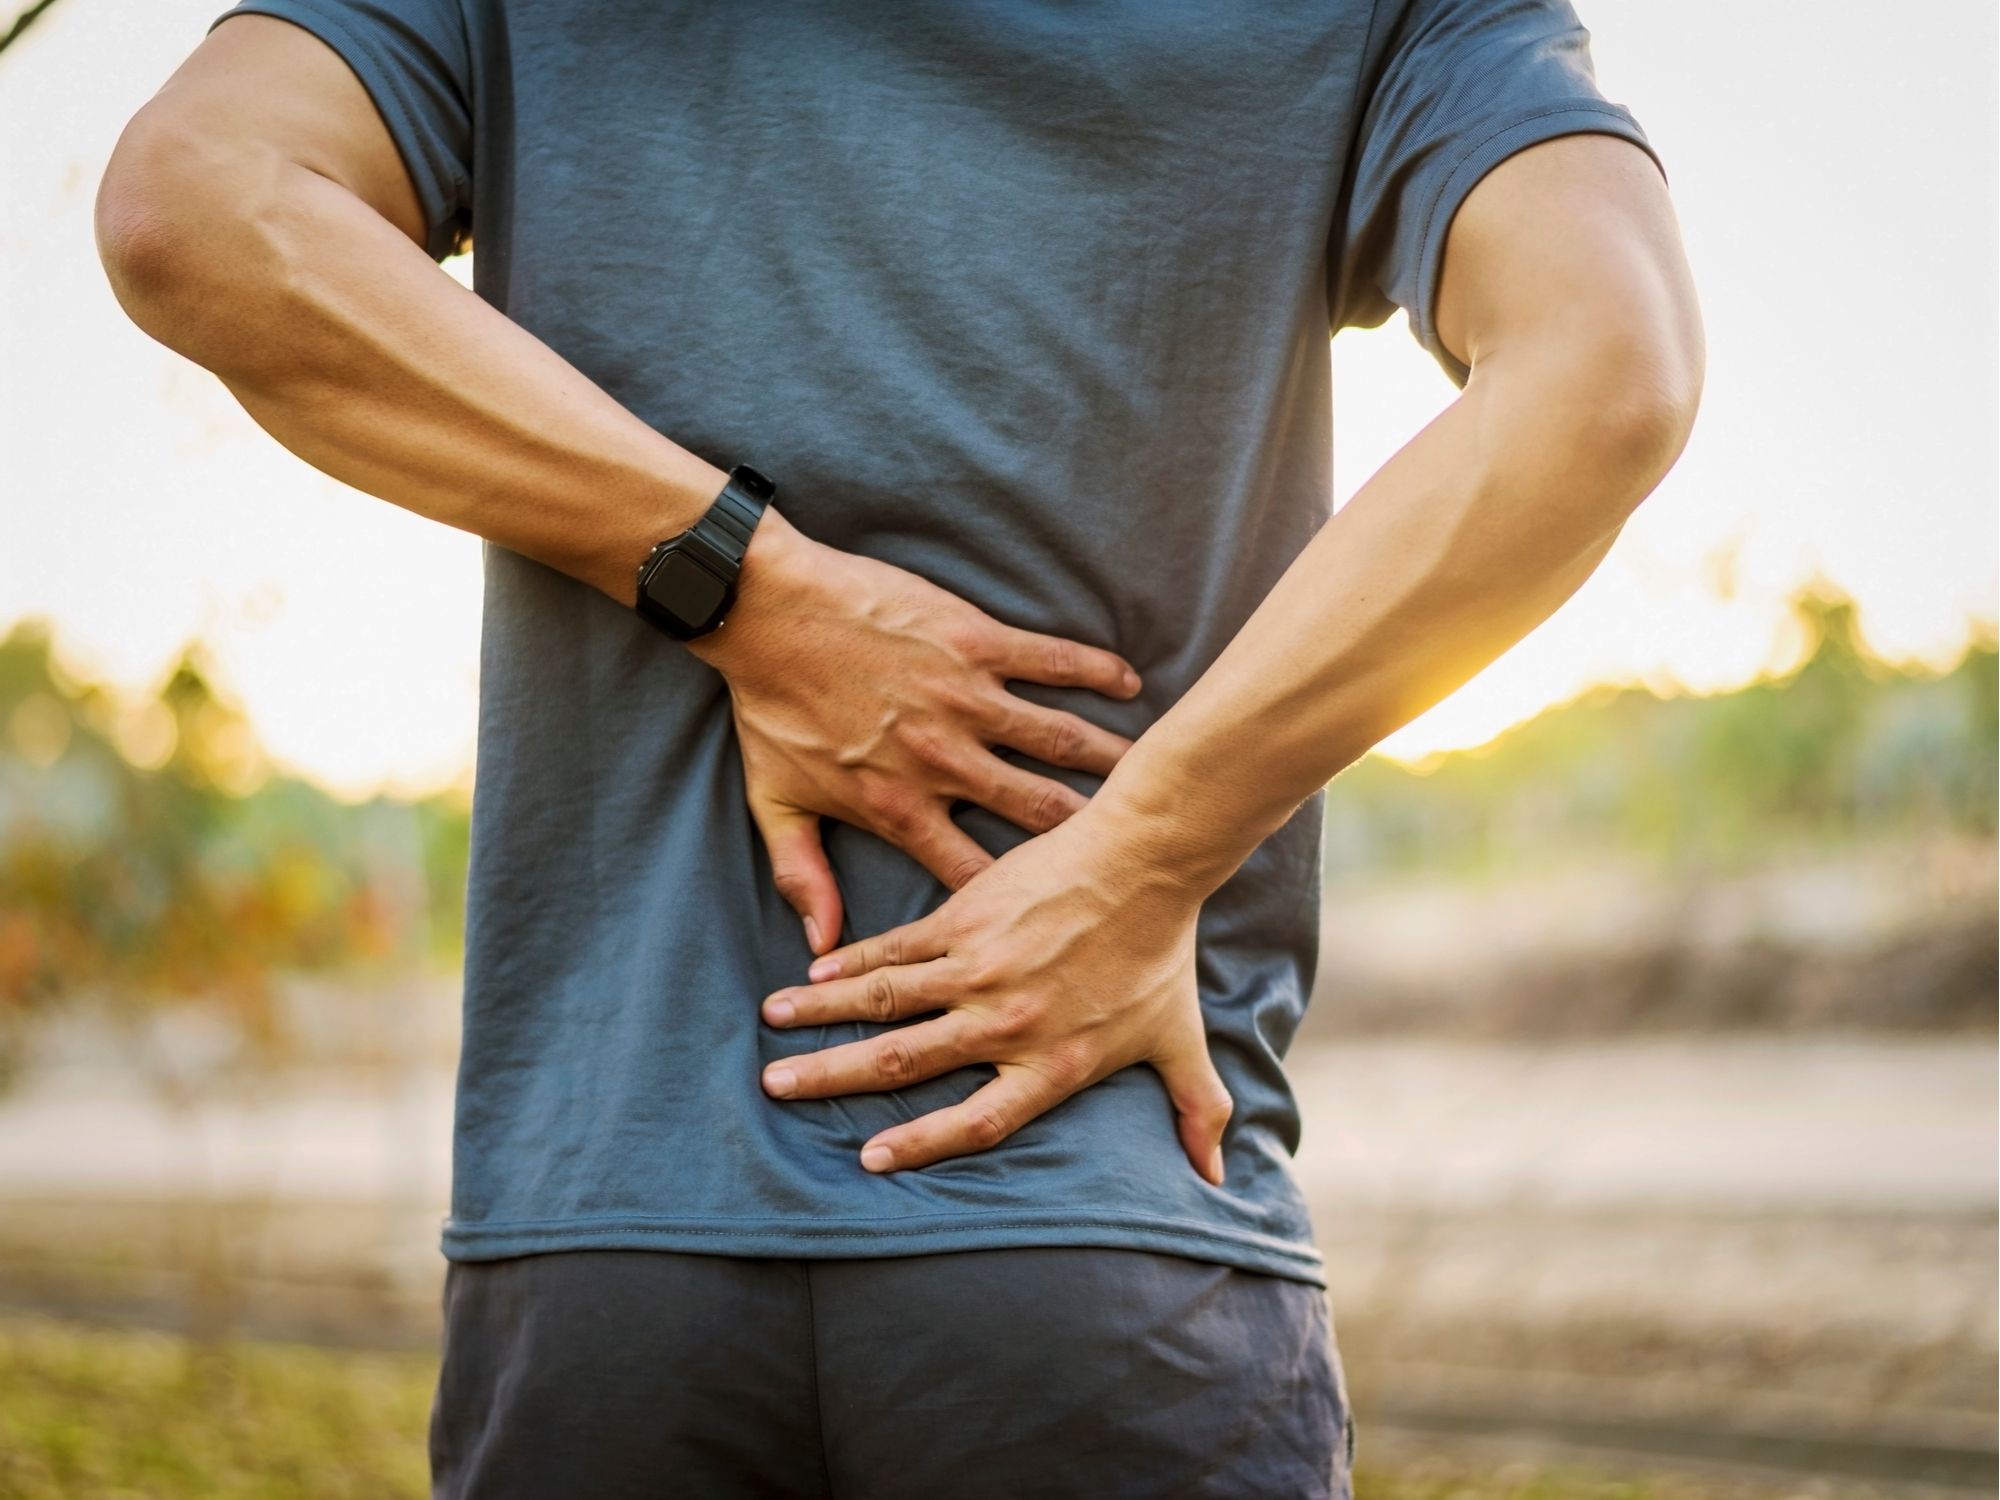 Benefits of Chiropractic Care for Back Pain